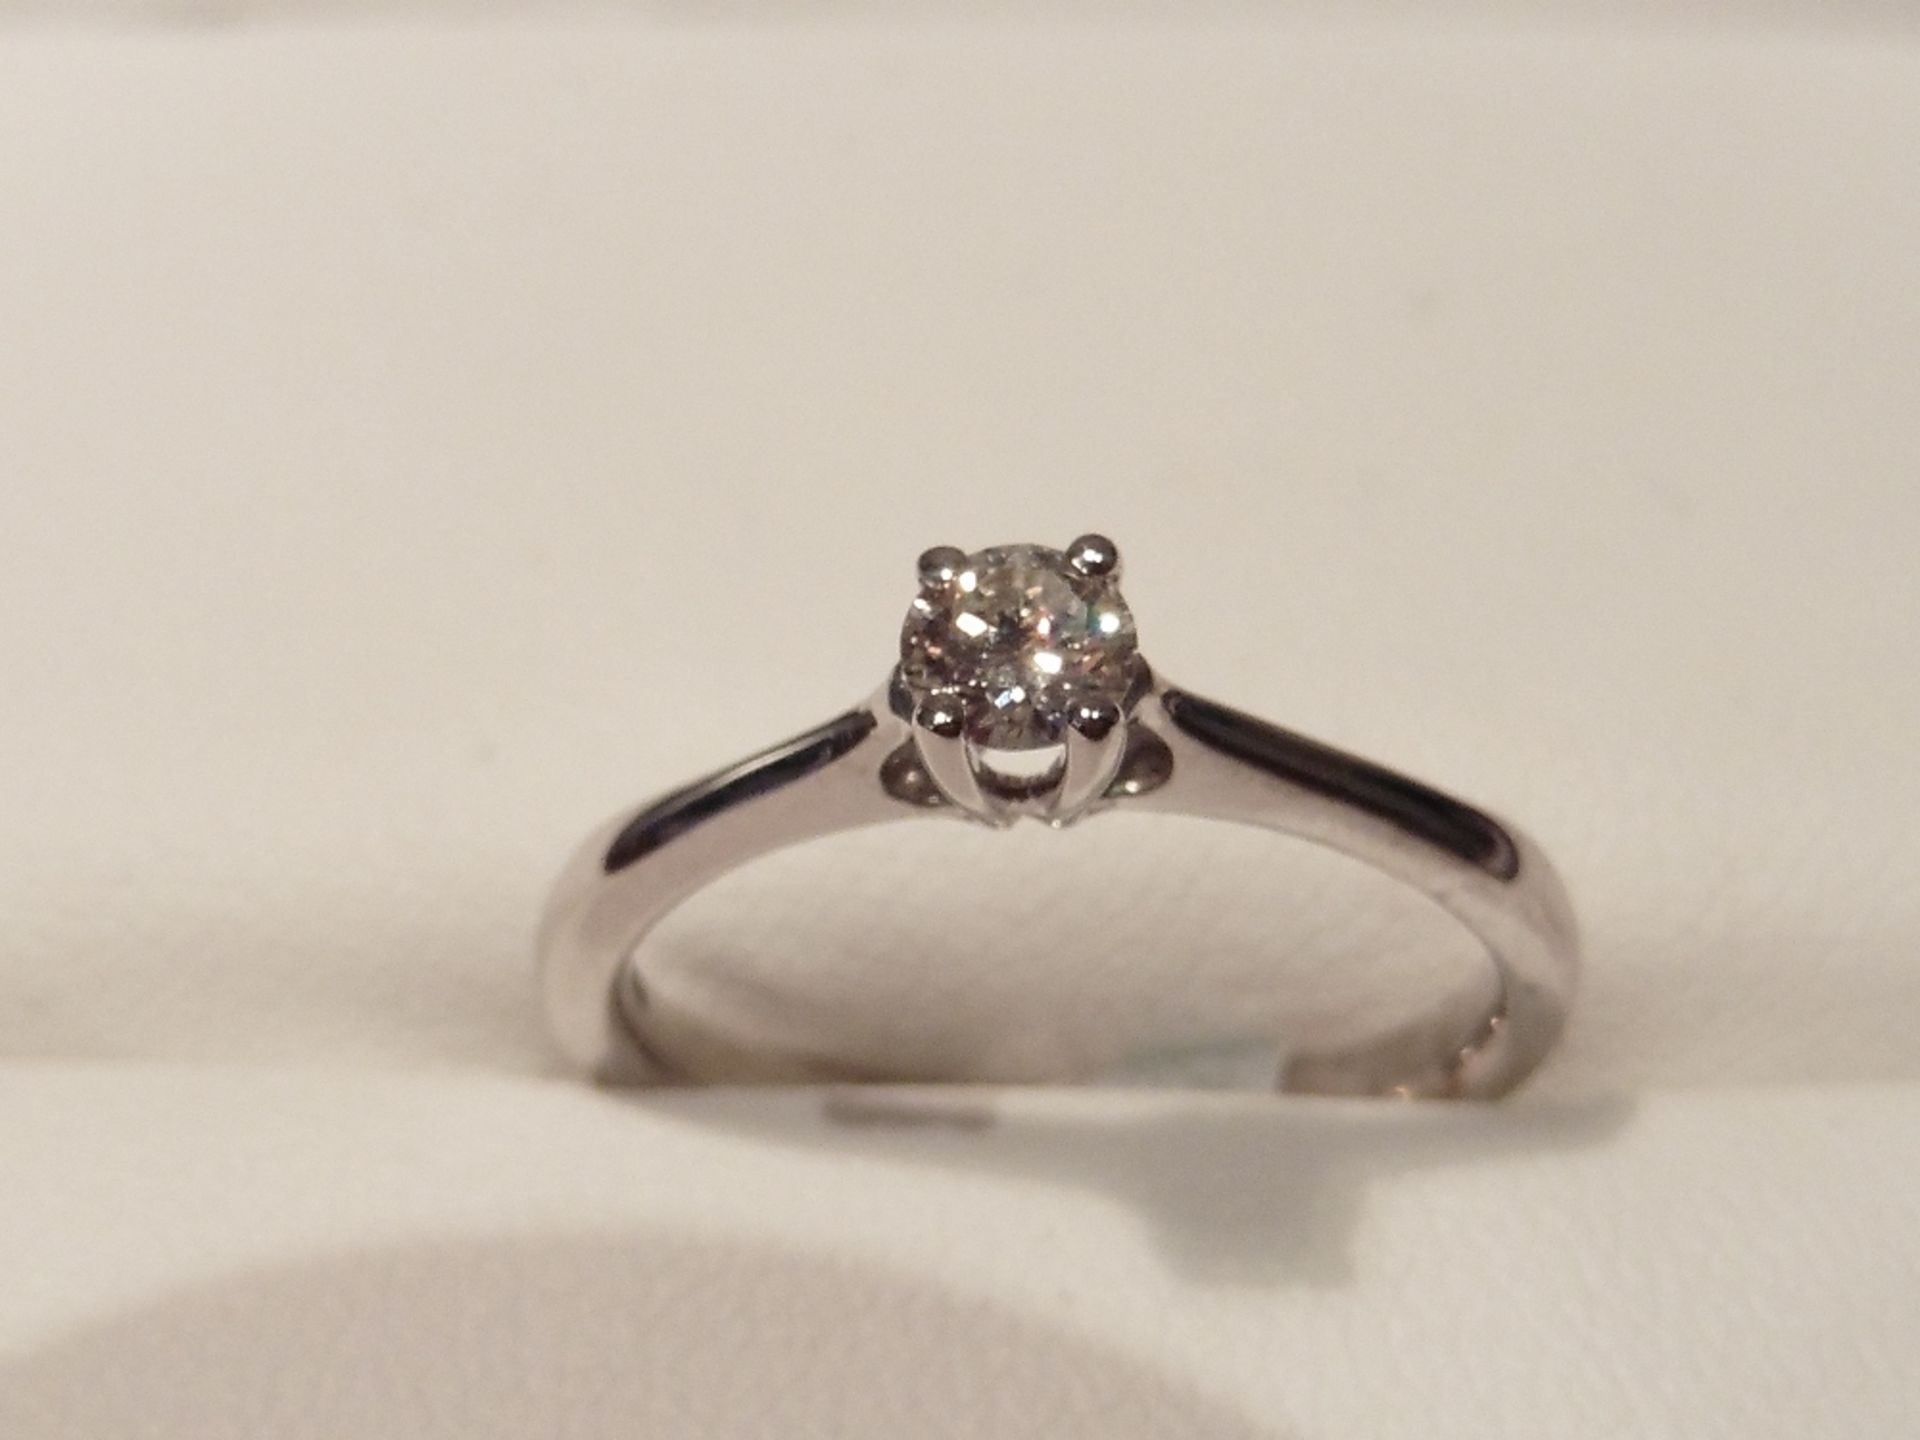 18ct white gold diamond solitaire ring set with a single brilliant cut diamond weighing 0.40ct of F